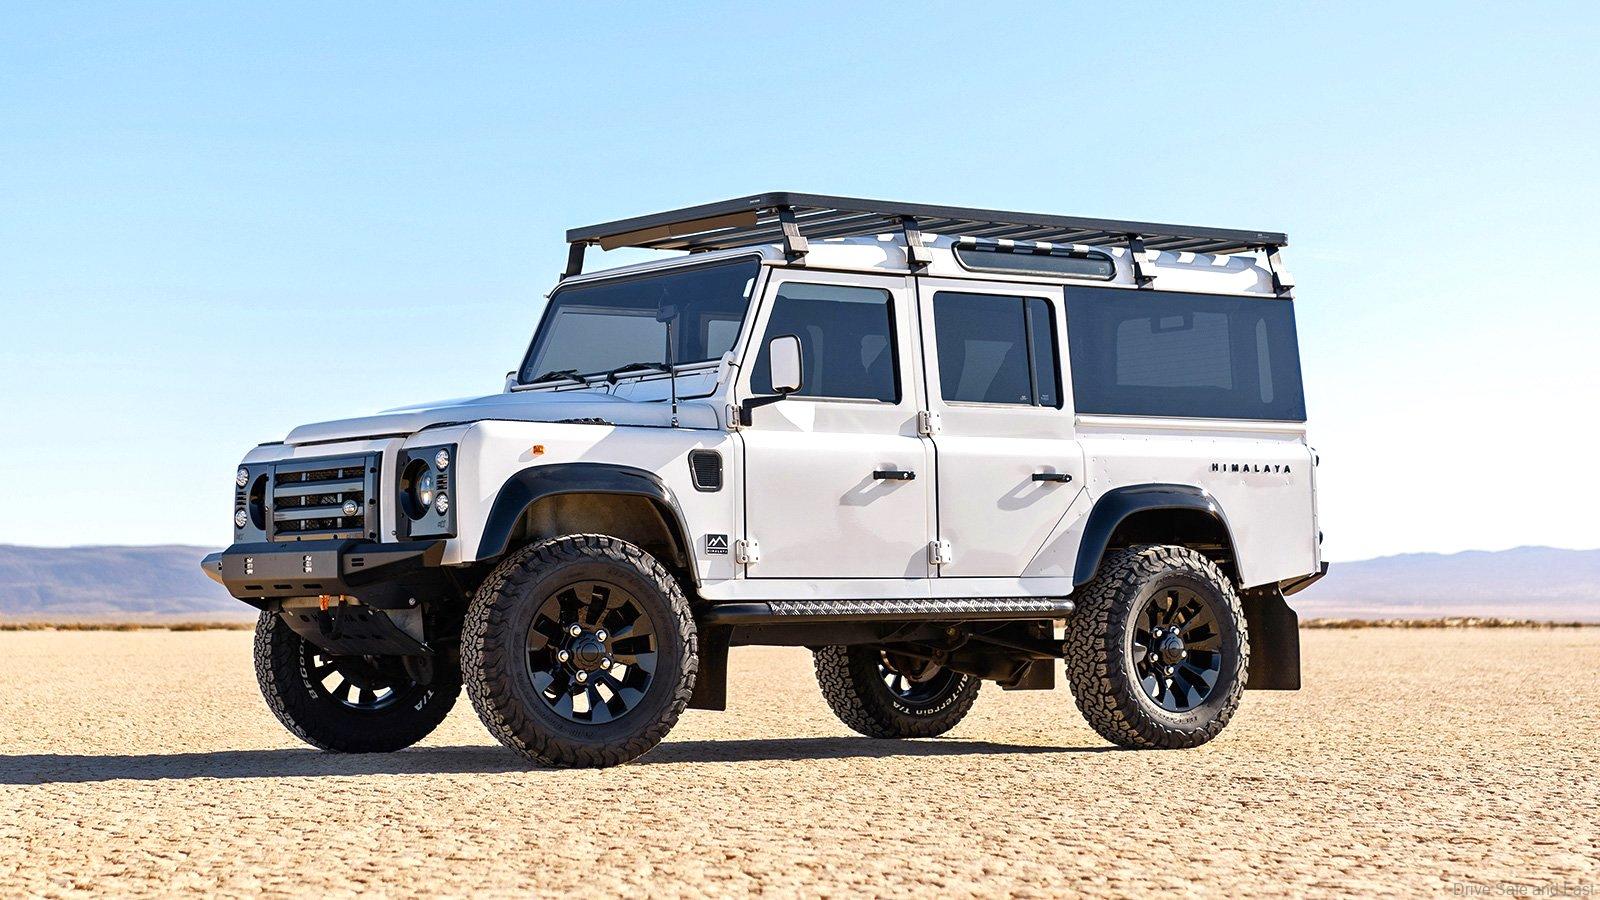 https://www.dsf.my/wp-content/uploads/2021/05/Land-Rover-Defender-110-Electric_Himalaya_front.jpeg?v=1622431562